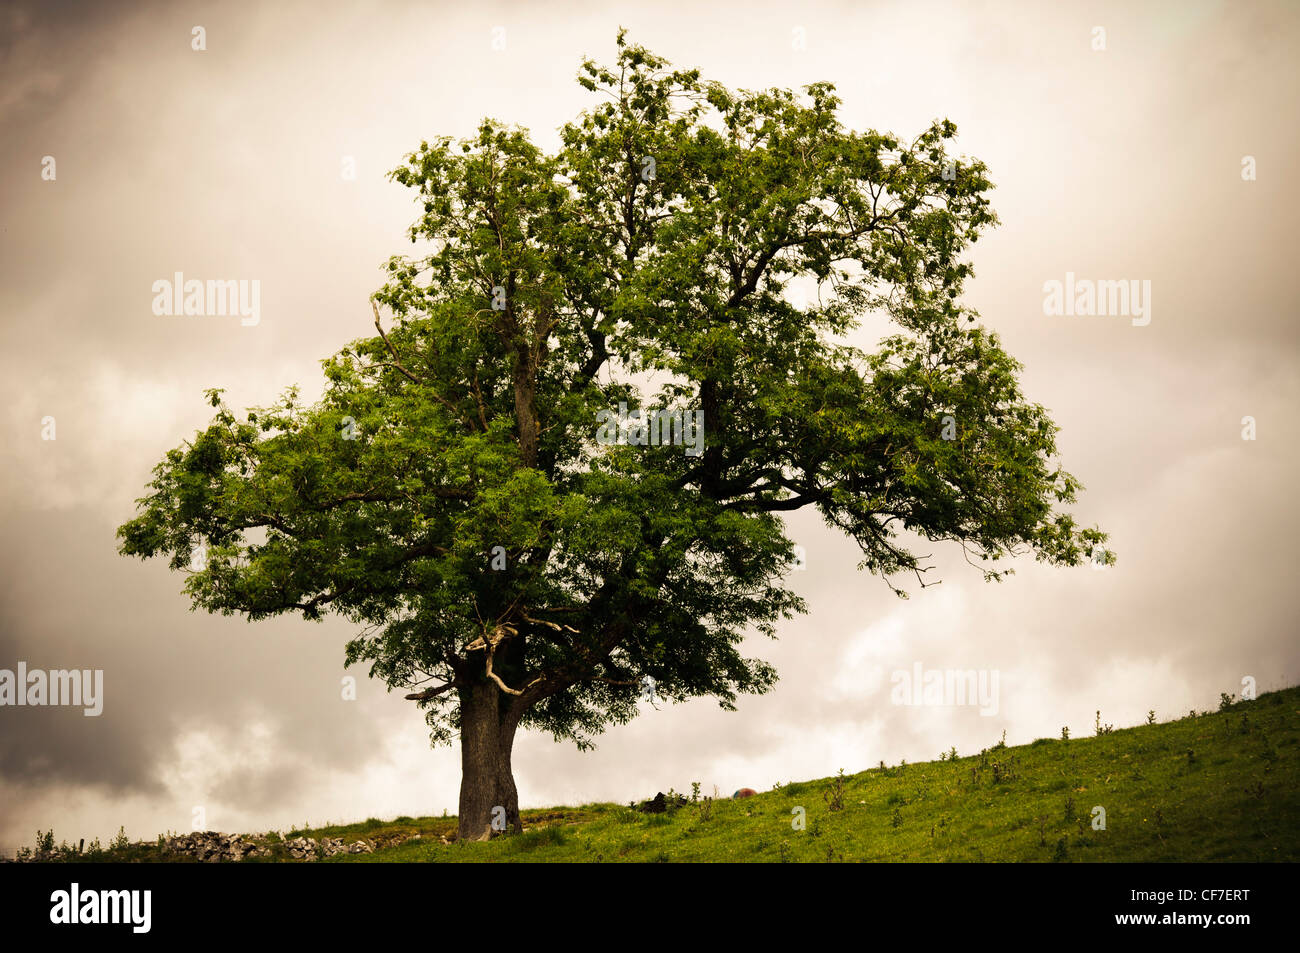 View of isolated tree, Wensleydale, Yorkshire Dales region, England Stock Photo